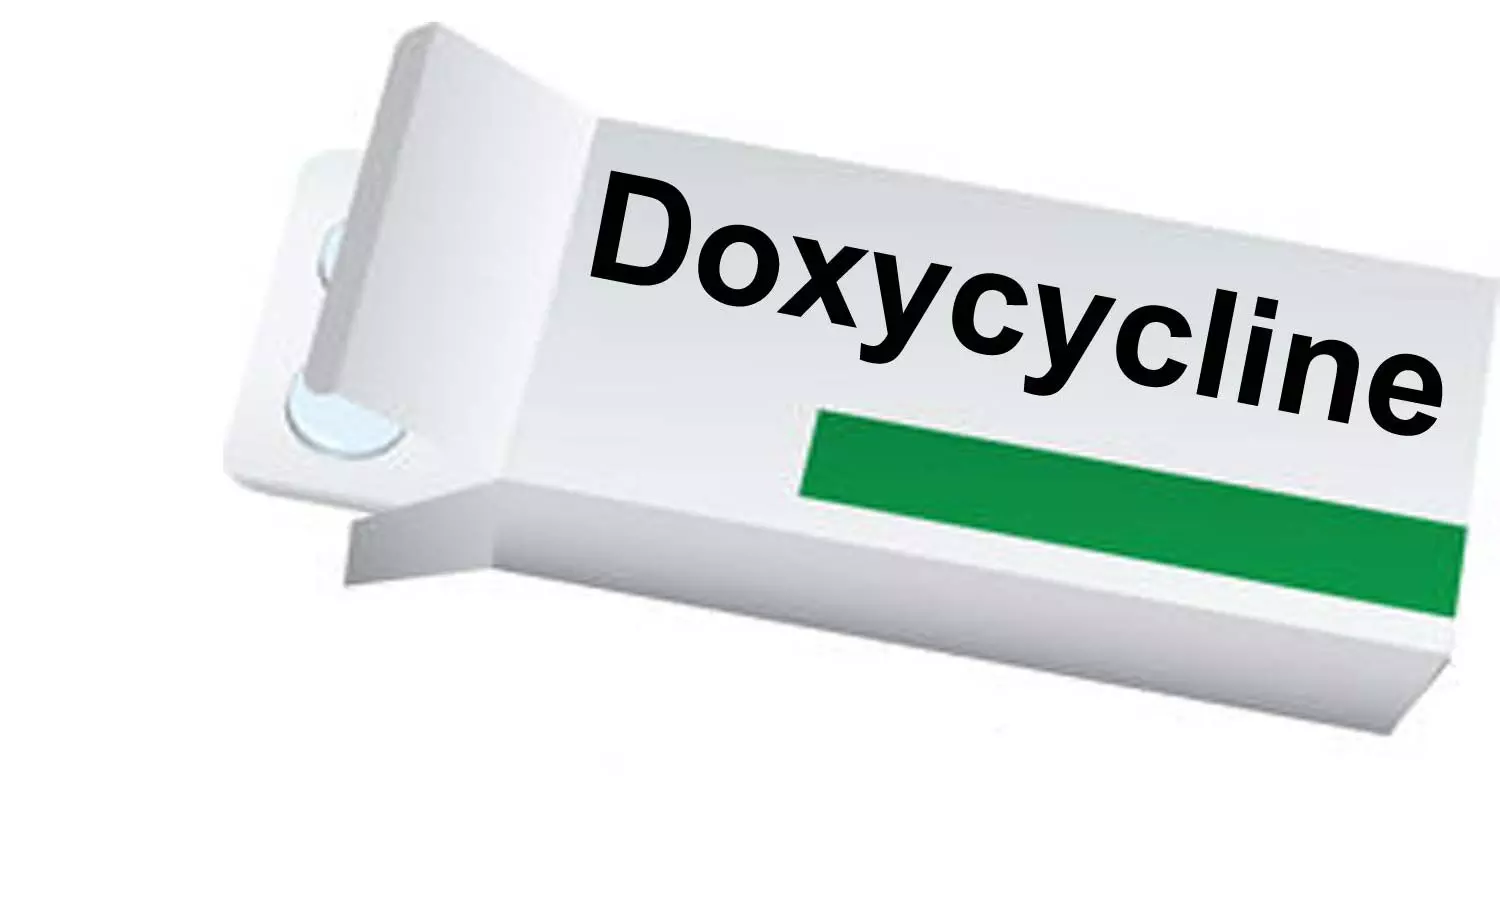 Doxycycline effective for successful treatment of pyoderma vegetans, reveals case report